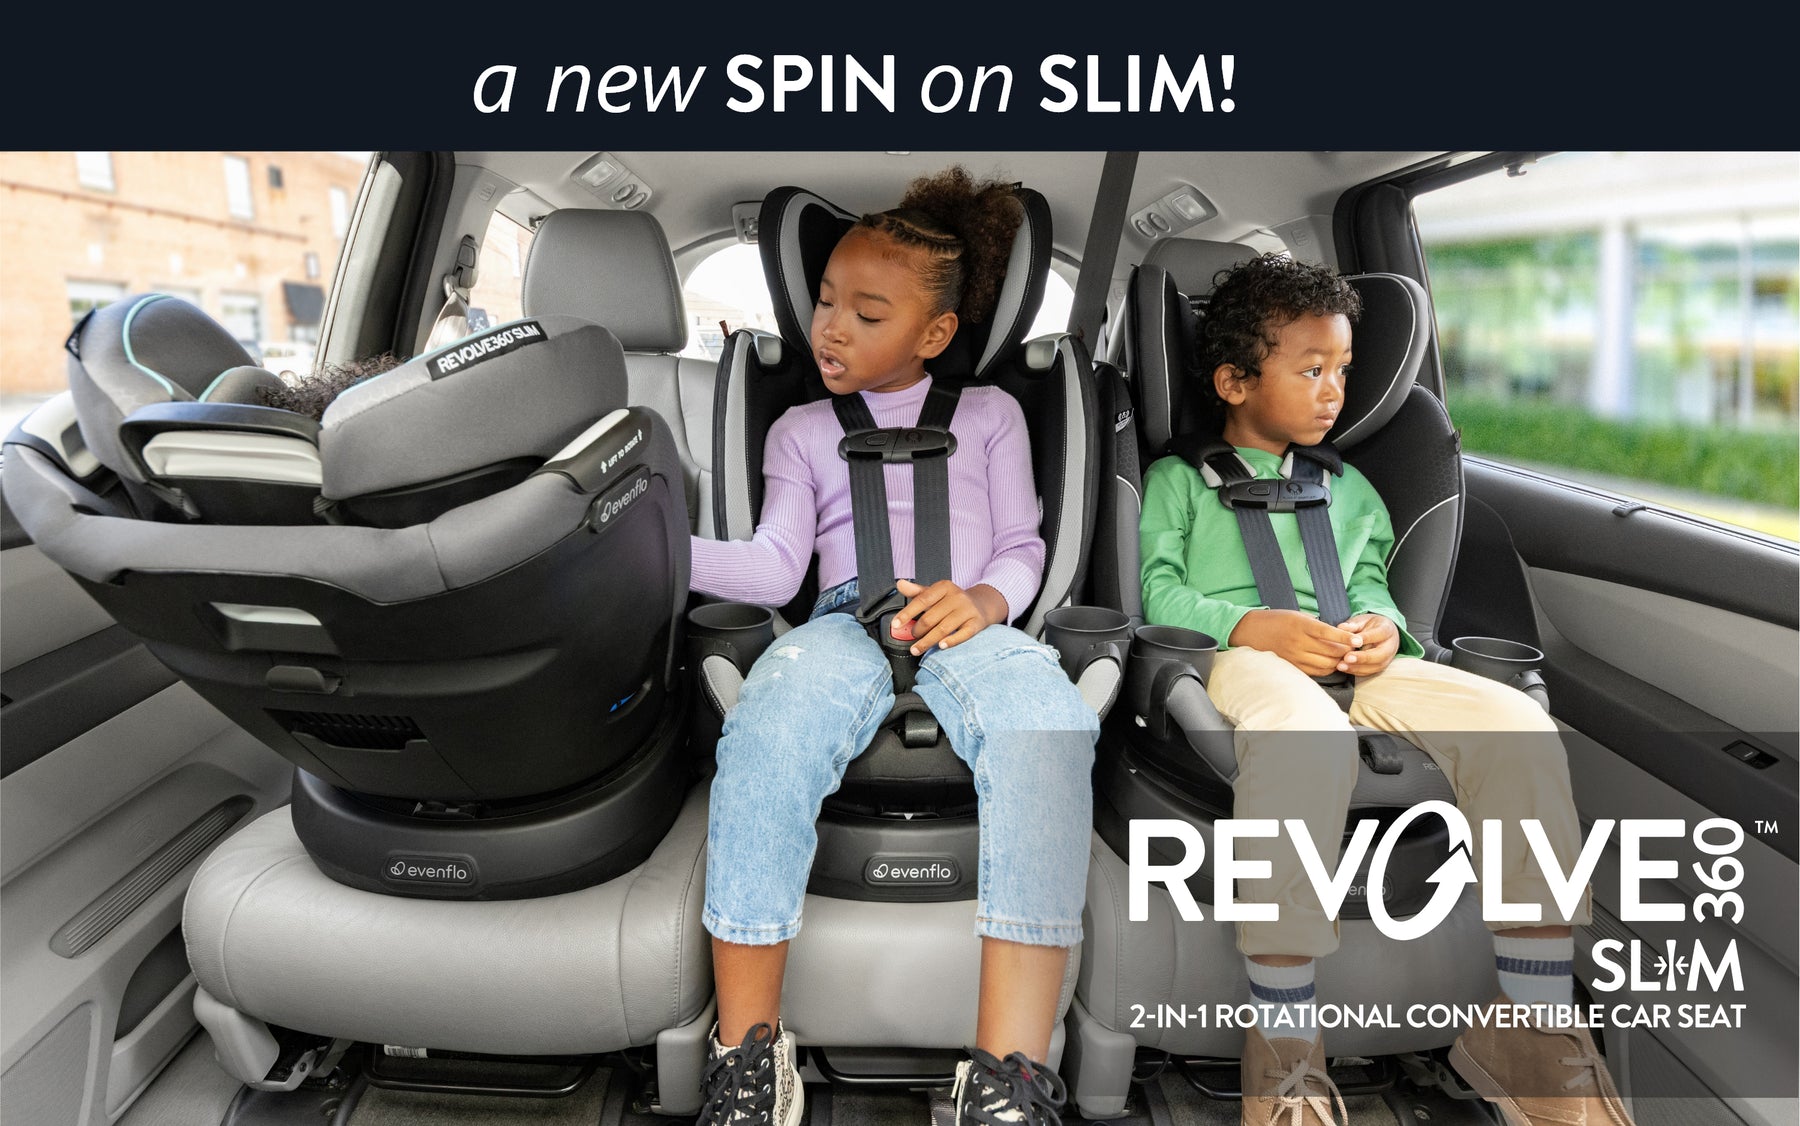 A new SPIN on SLIM! Revolve360 Slim 2-in-1 Rotational Convertible Car Seat. Image of children sitting in Revolve360 Slim in the car.